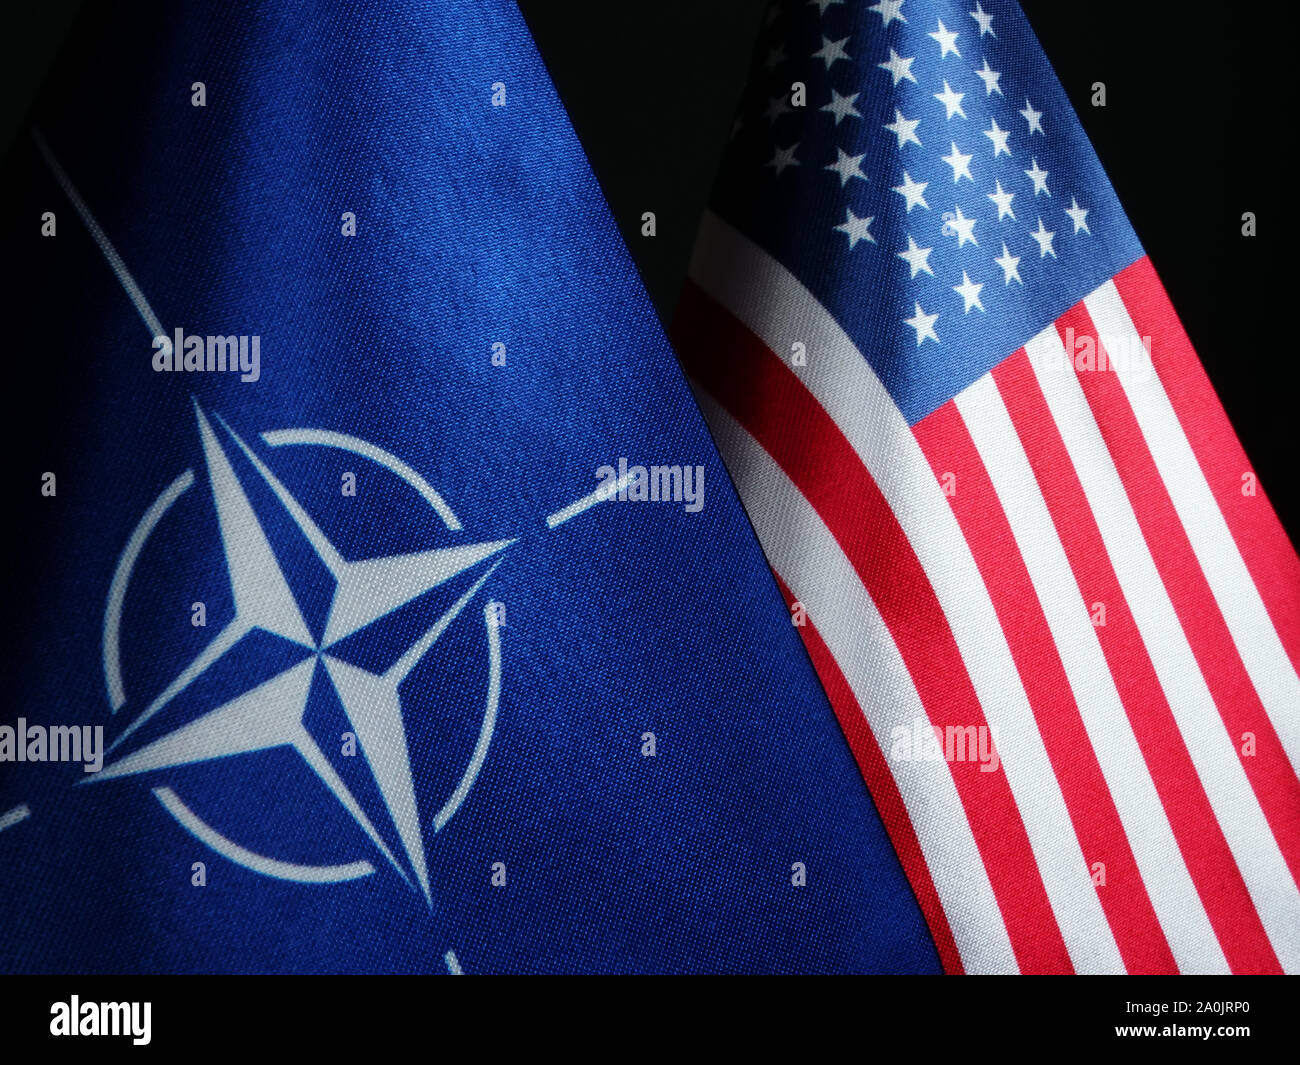 NATO and USA flags in dark. Stock Photo